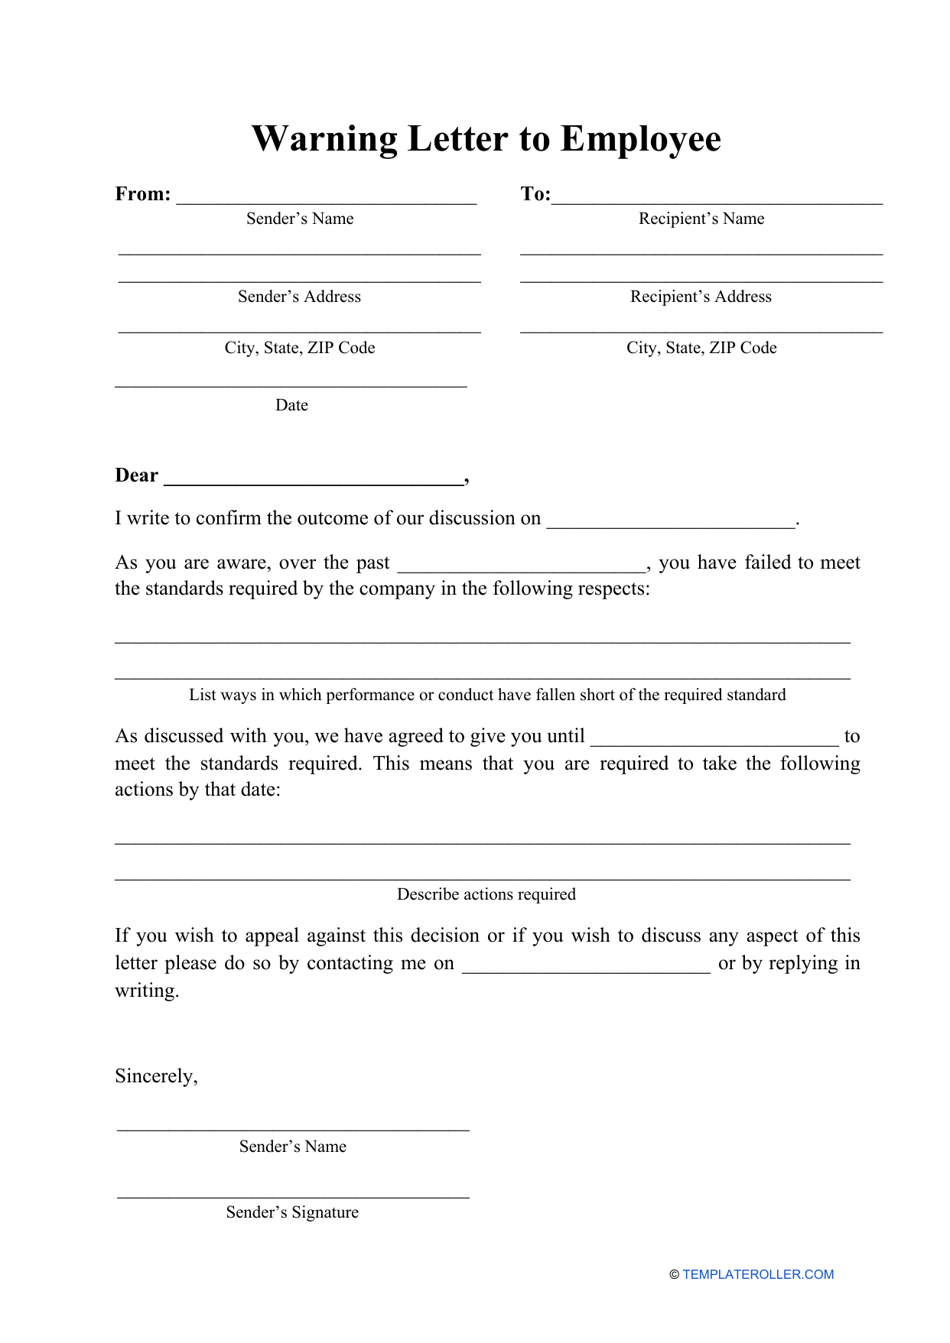 Warning Letter to Employee Template, Page 1